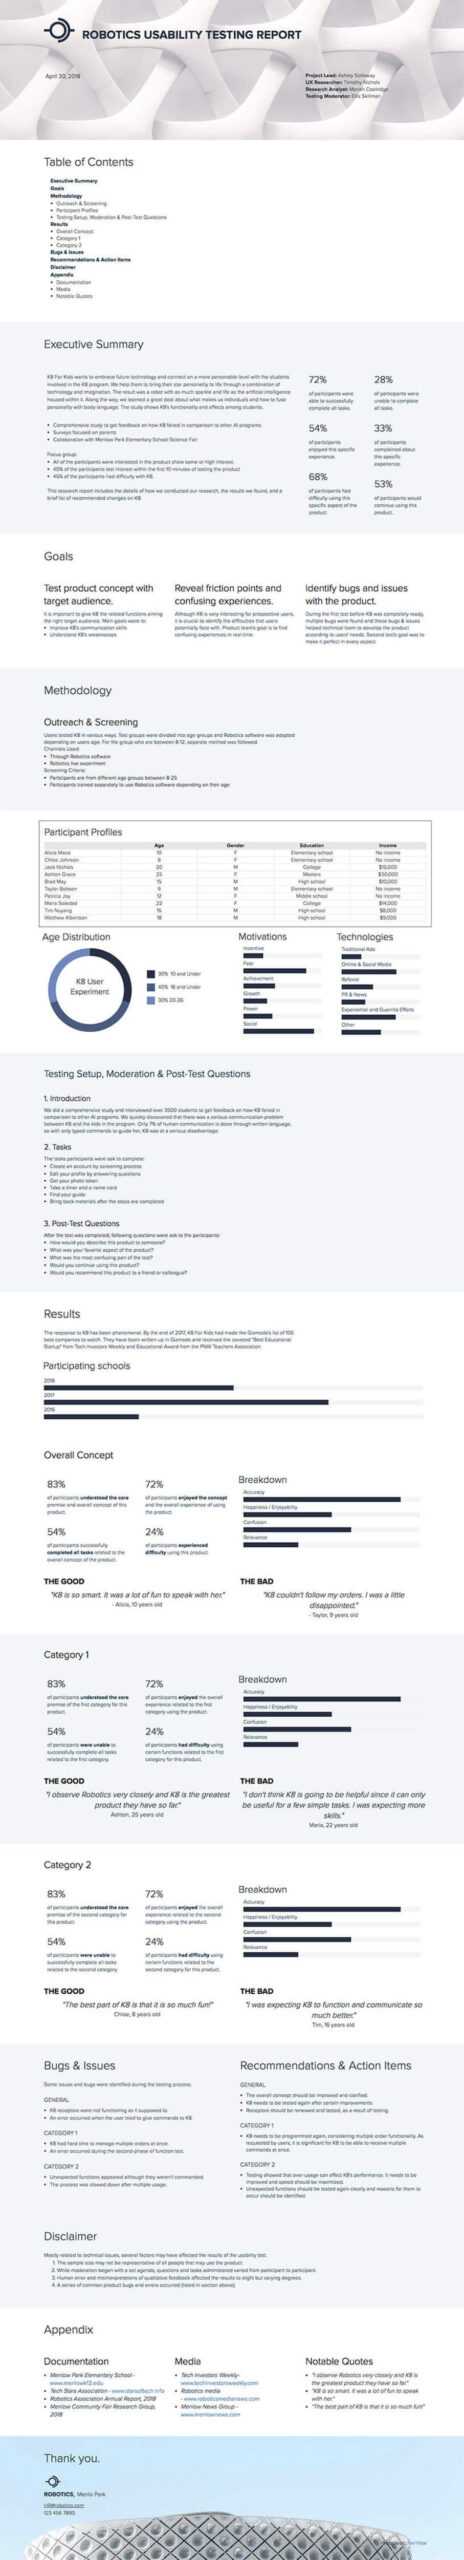 How To Write A Usability Testing Report (With Samples) | Xtensio In Ux Report Template